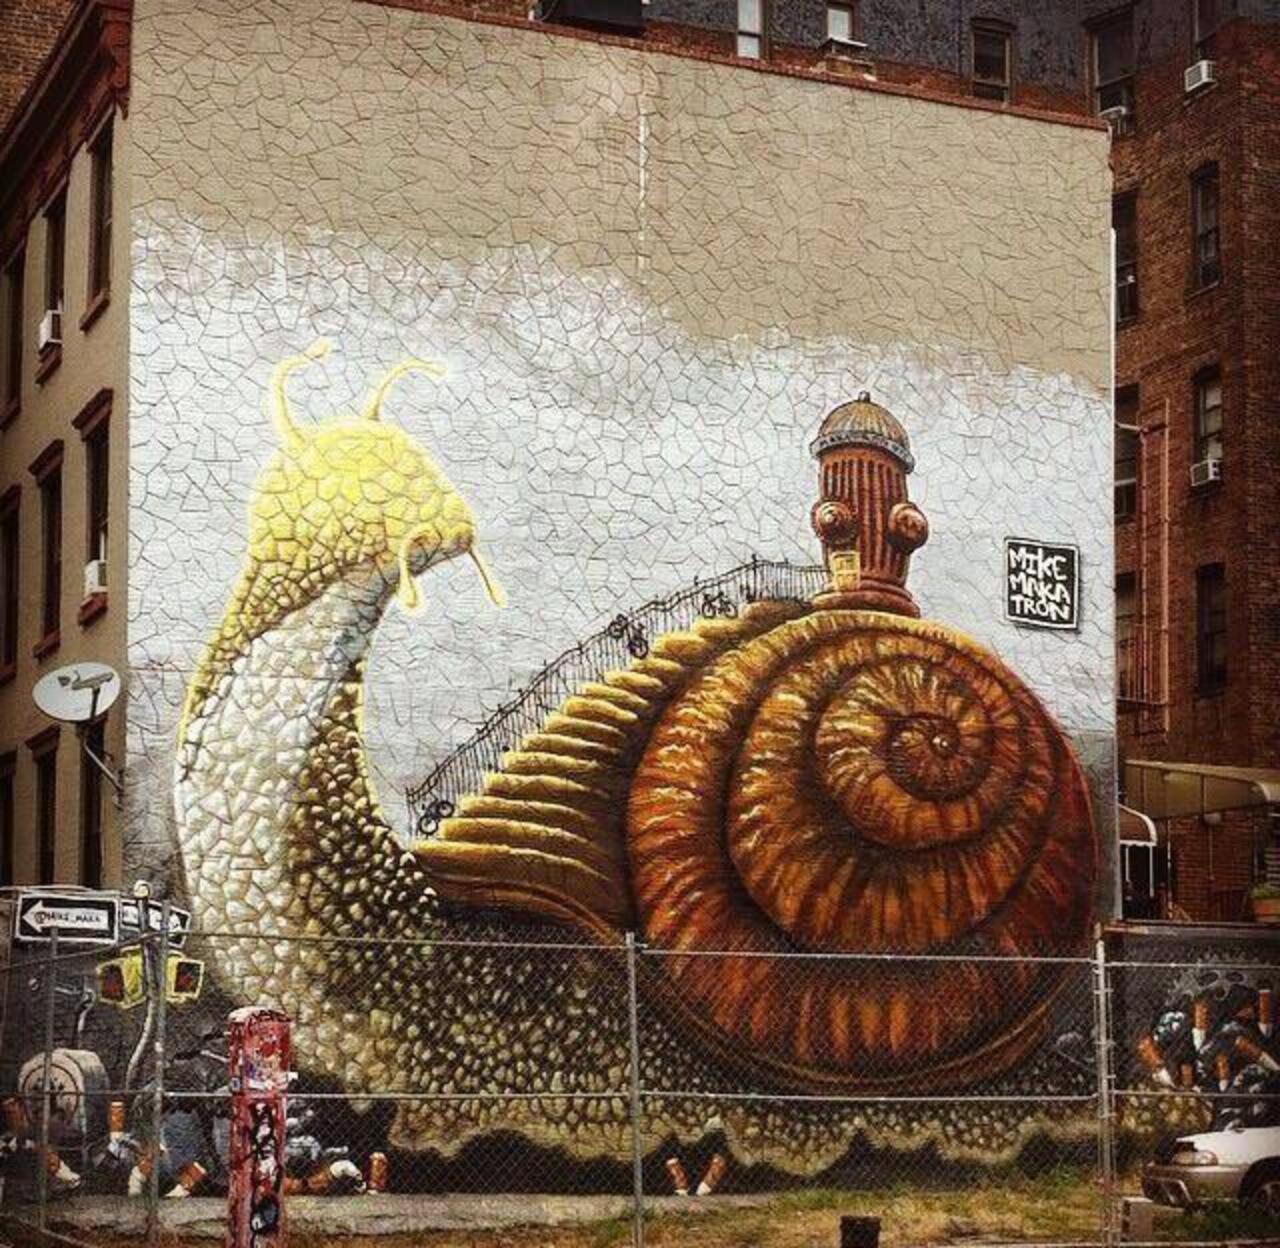 RT @designopinion: Artist Mike Makatron fantastic large scale Street Art located in Brooklyn, NY #art #graffiti #mural #streetart https://t.co/vpEqFw8O6h